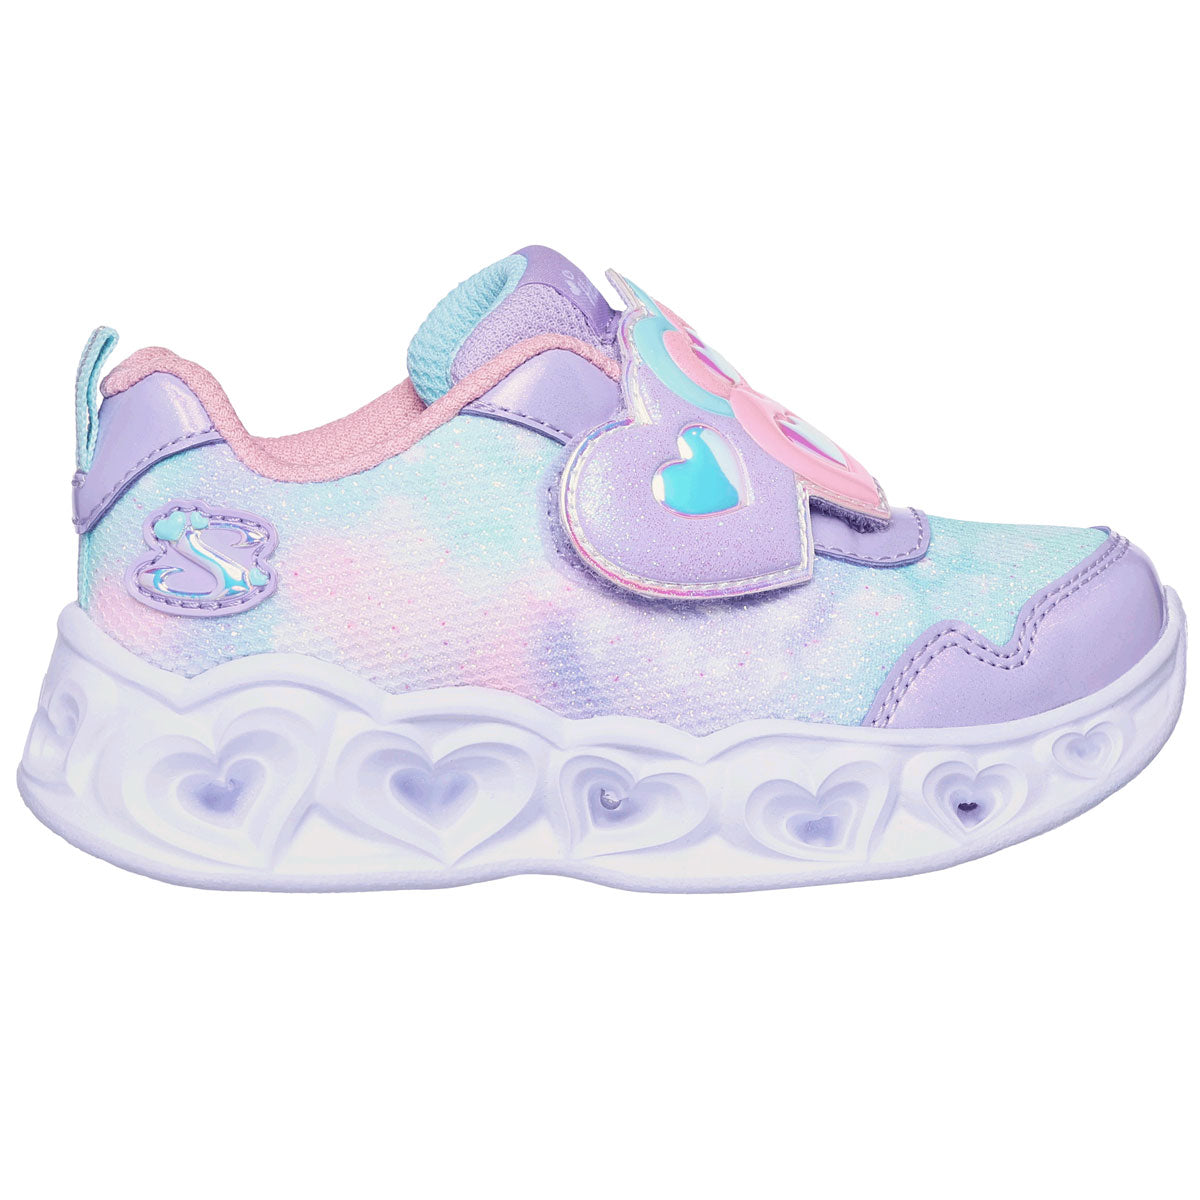 Skechers Heart Lights Trainers - Girls - Lilac/Pink/Blue